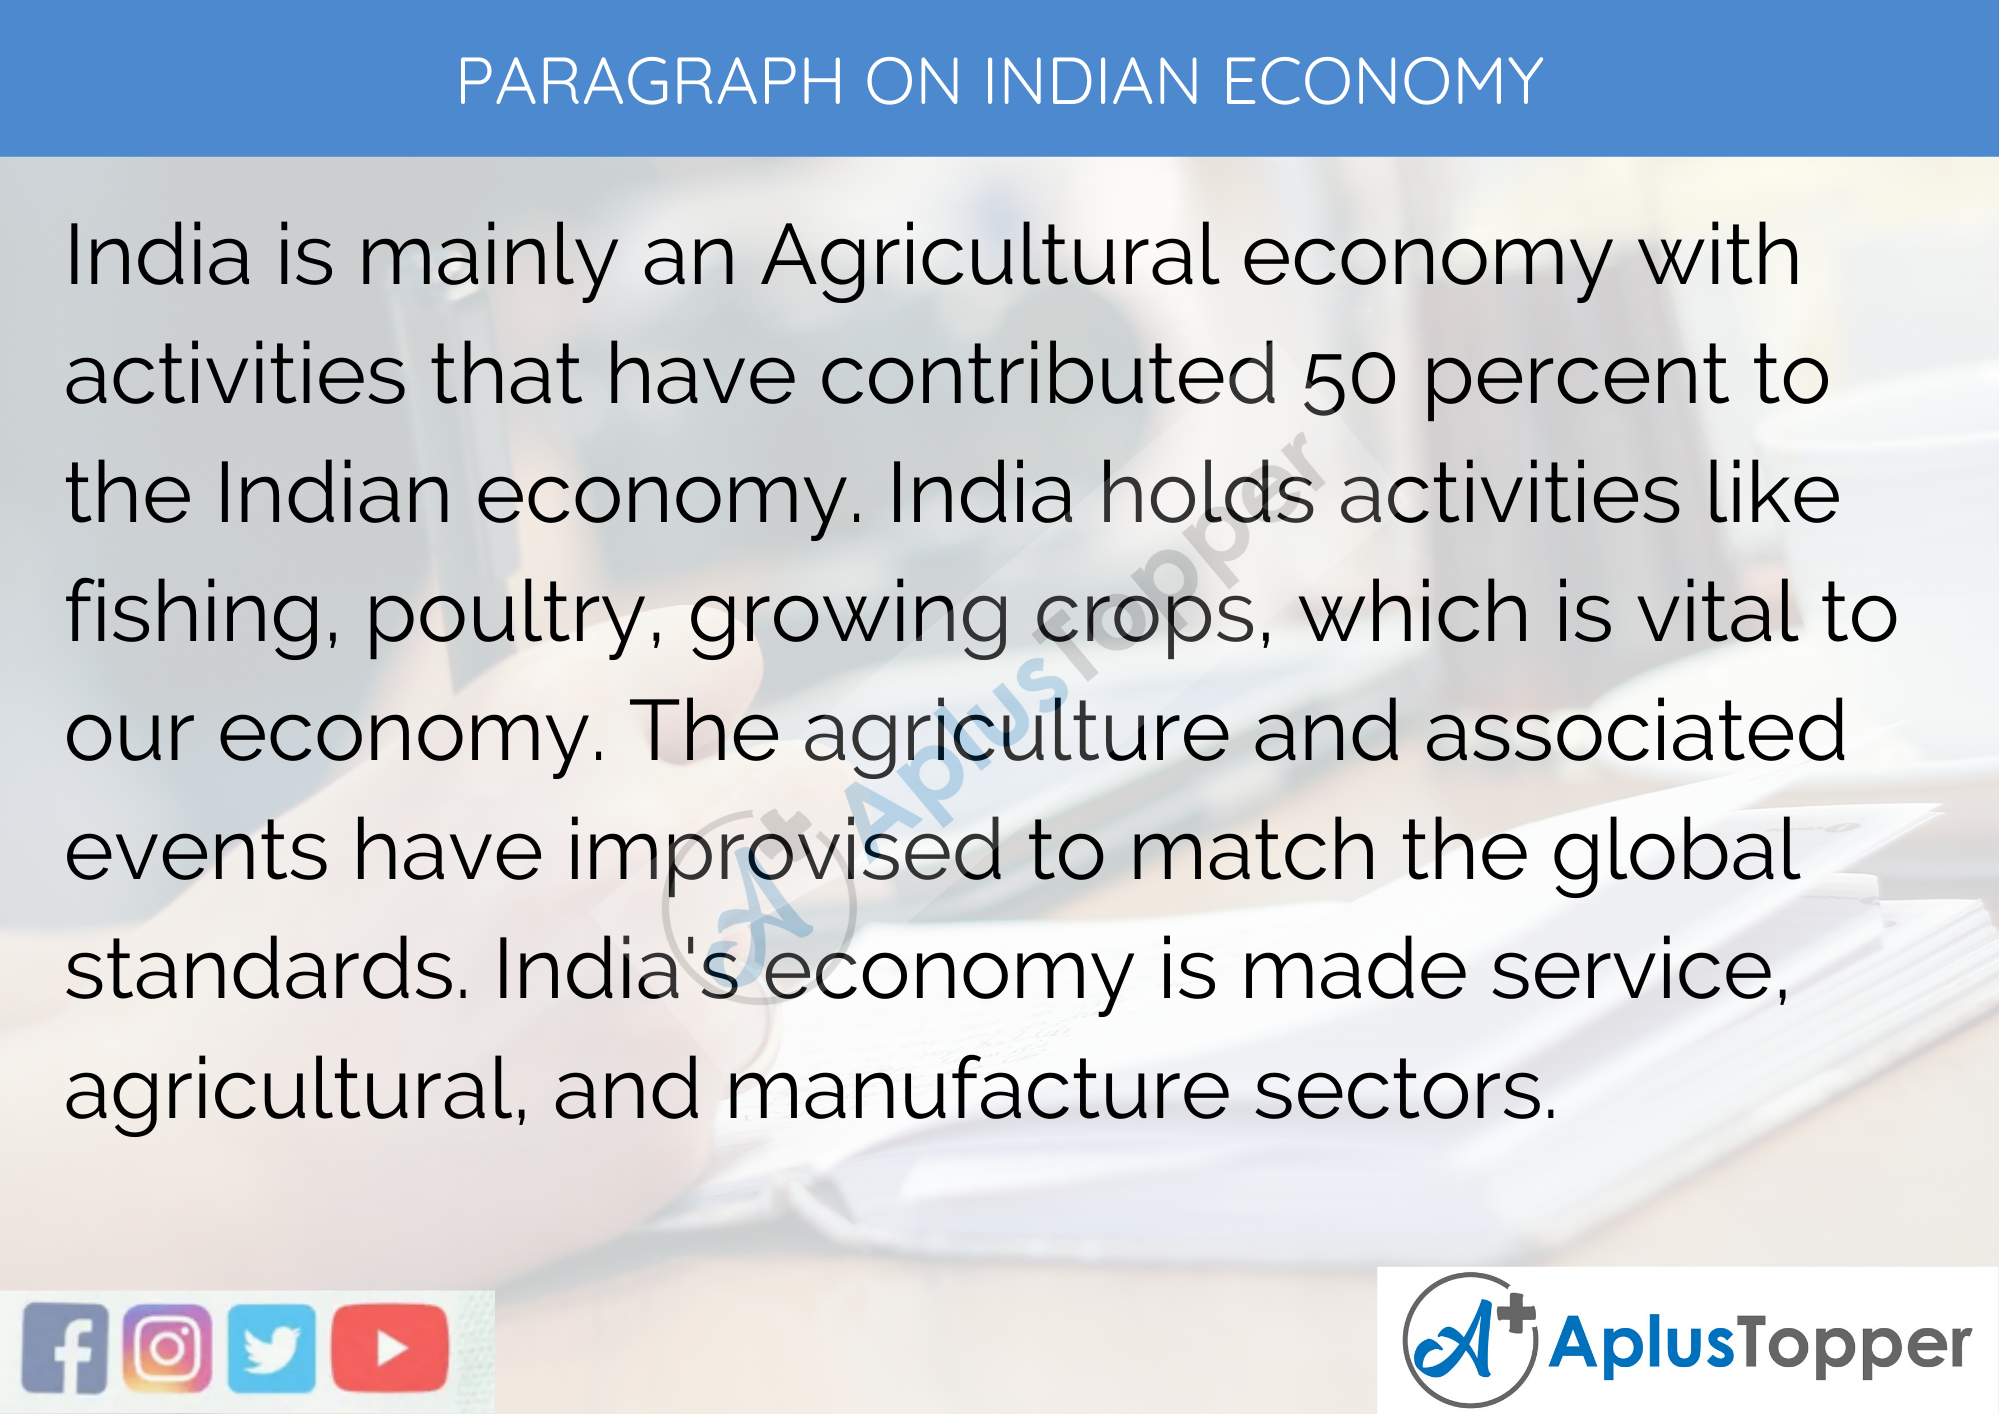 Paragraph on Indian Economy - 100 Words for Classes 1, 2, and 3 Kids